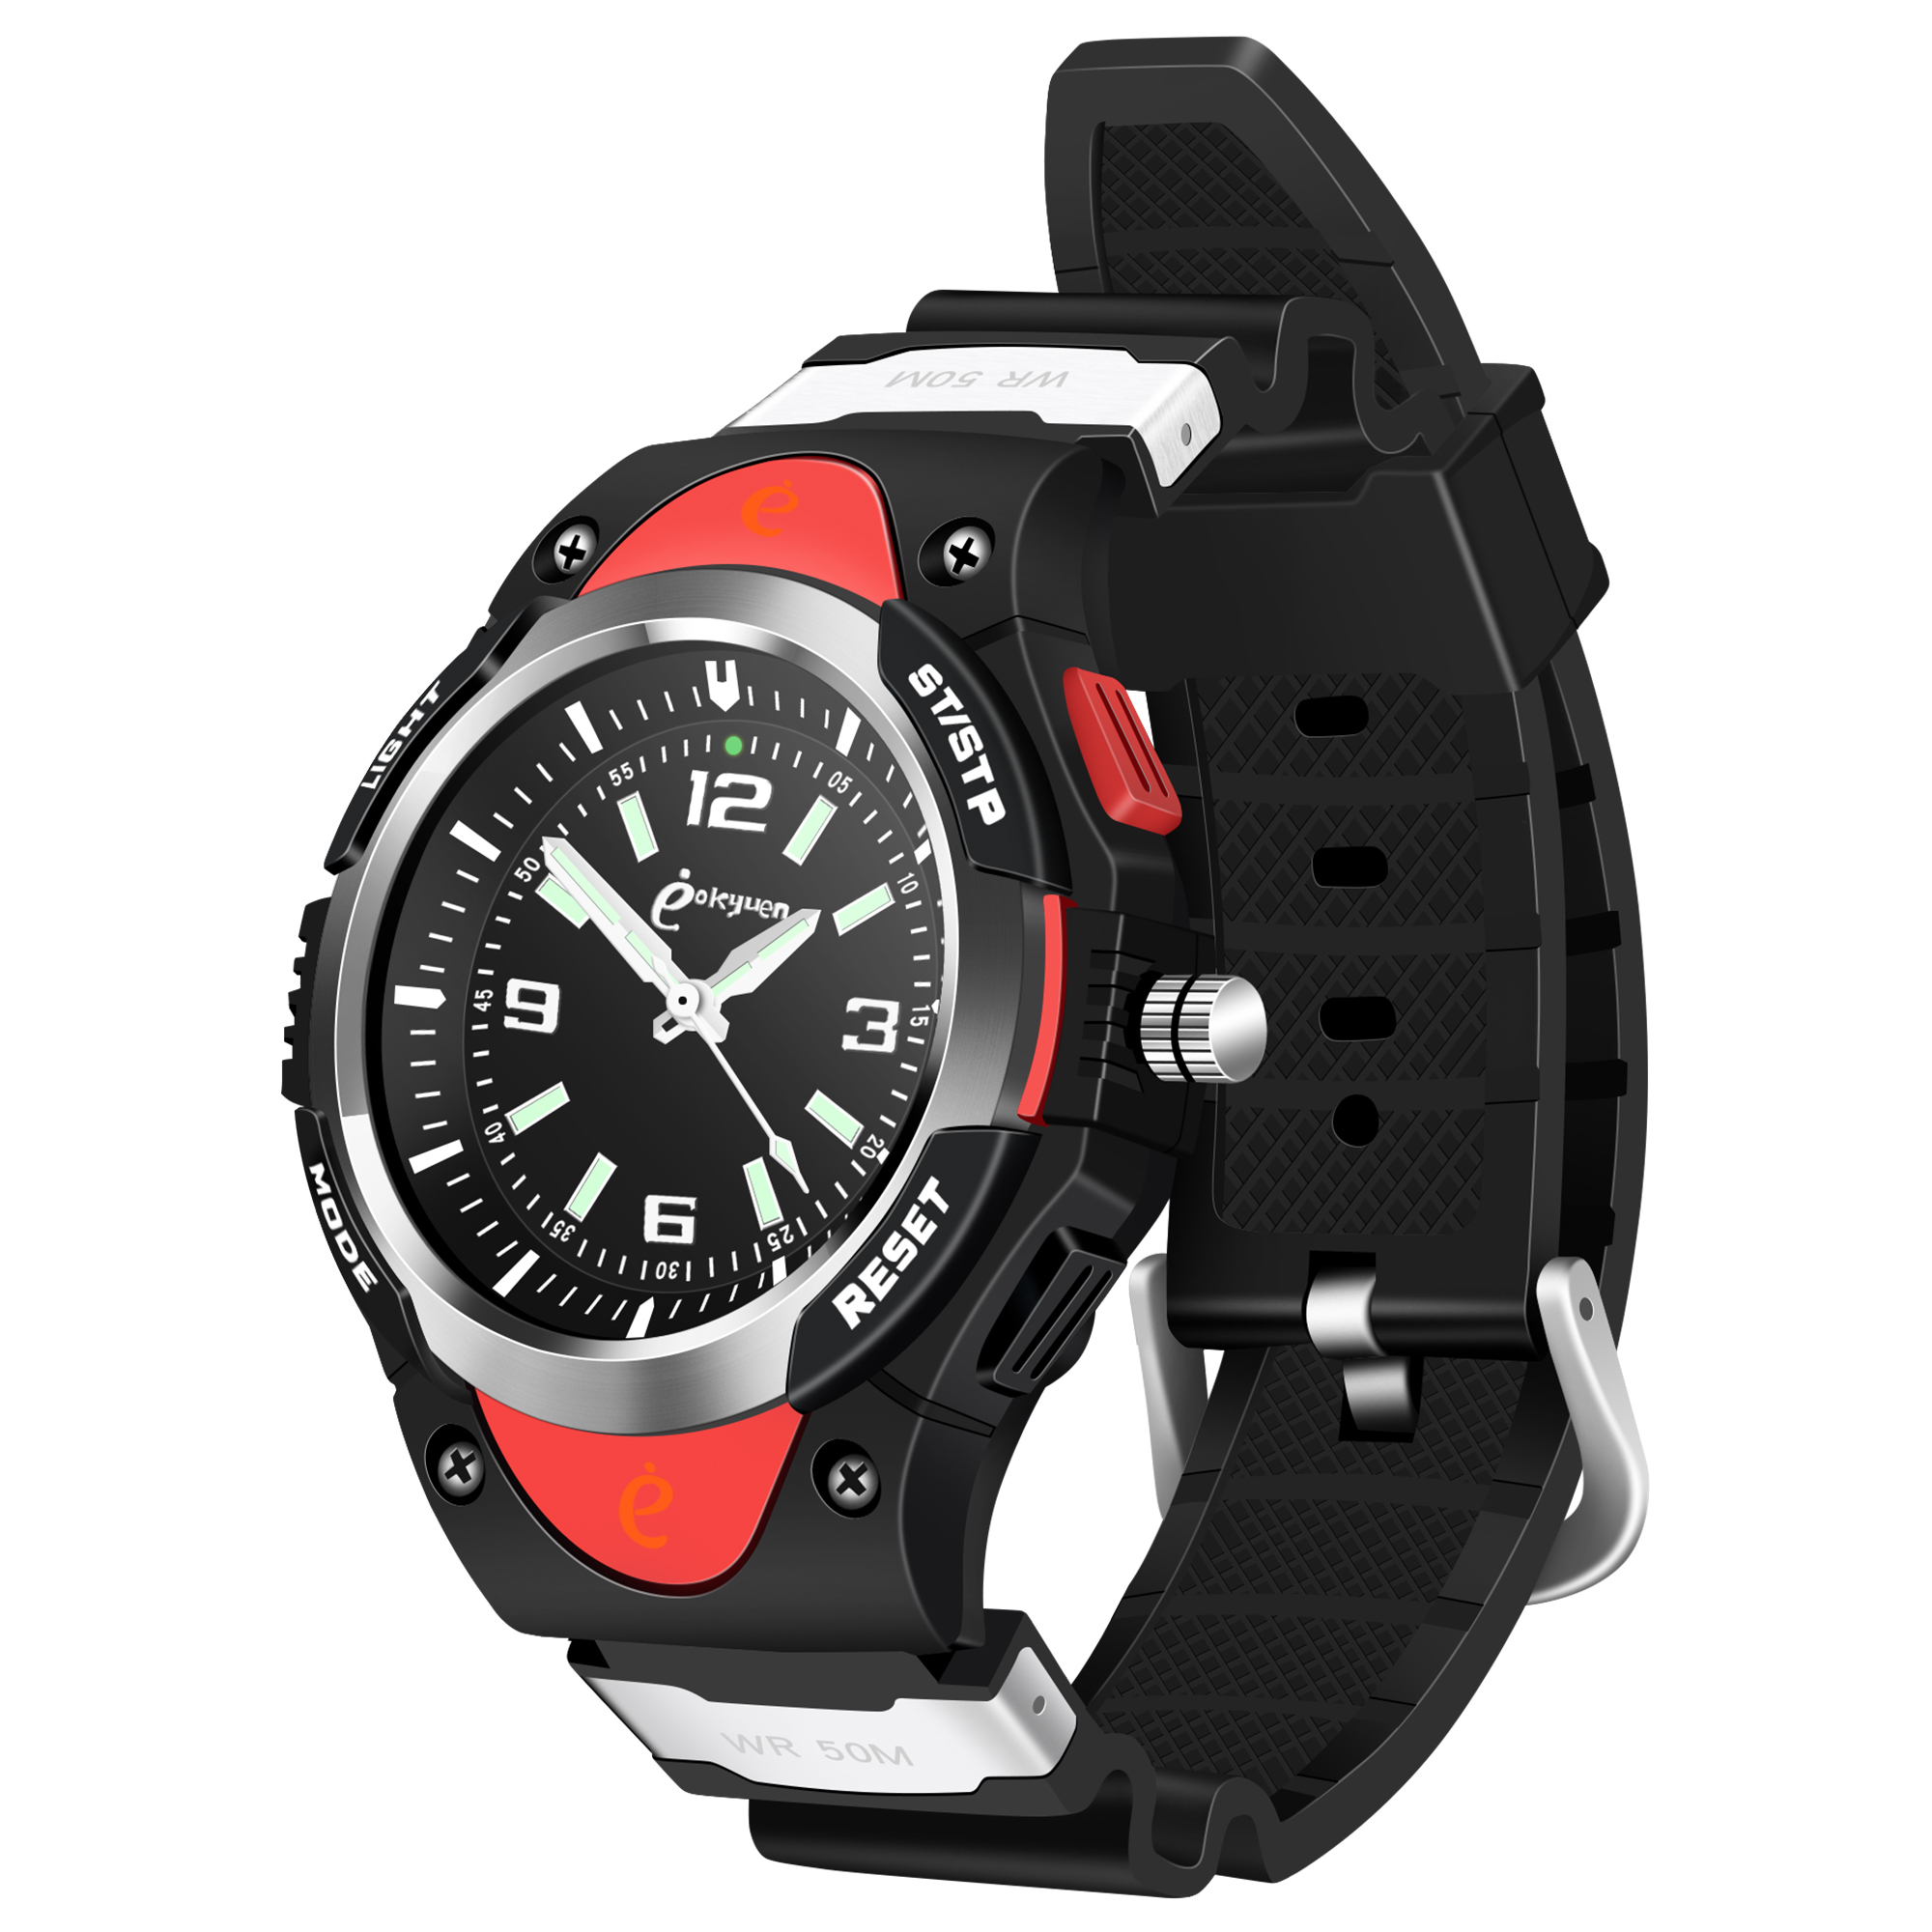 Watch with GPS Tracker